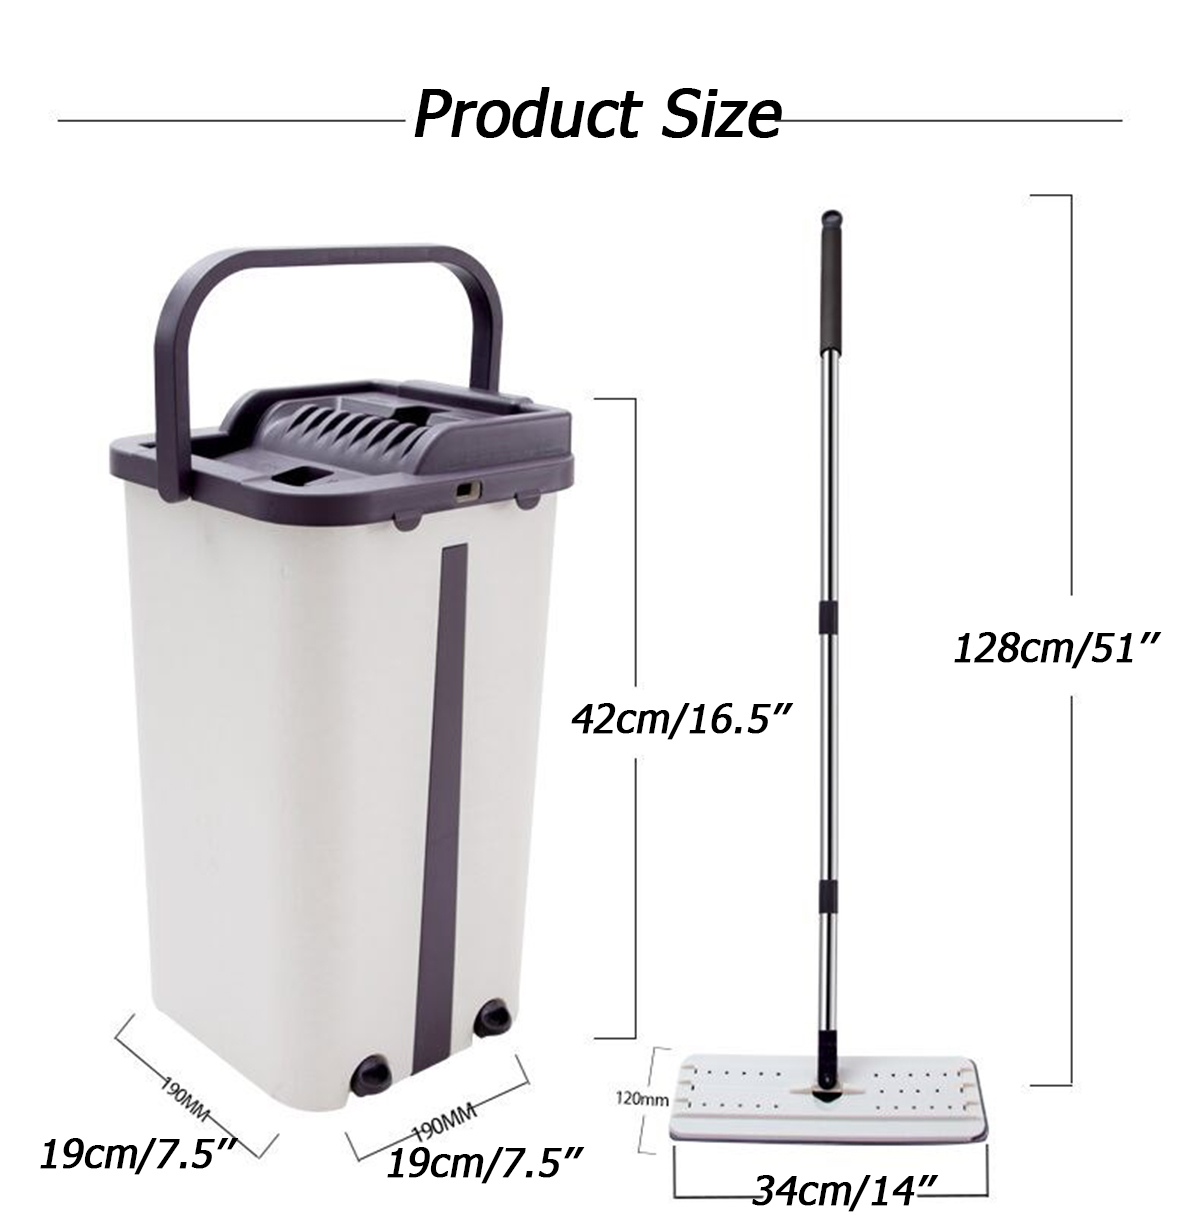 Stainless Steel Flat Squeeze Mop With Bucket Floor Dust Cleaning Microfiber Mops